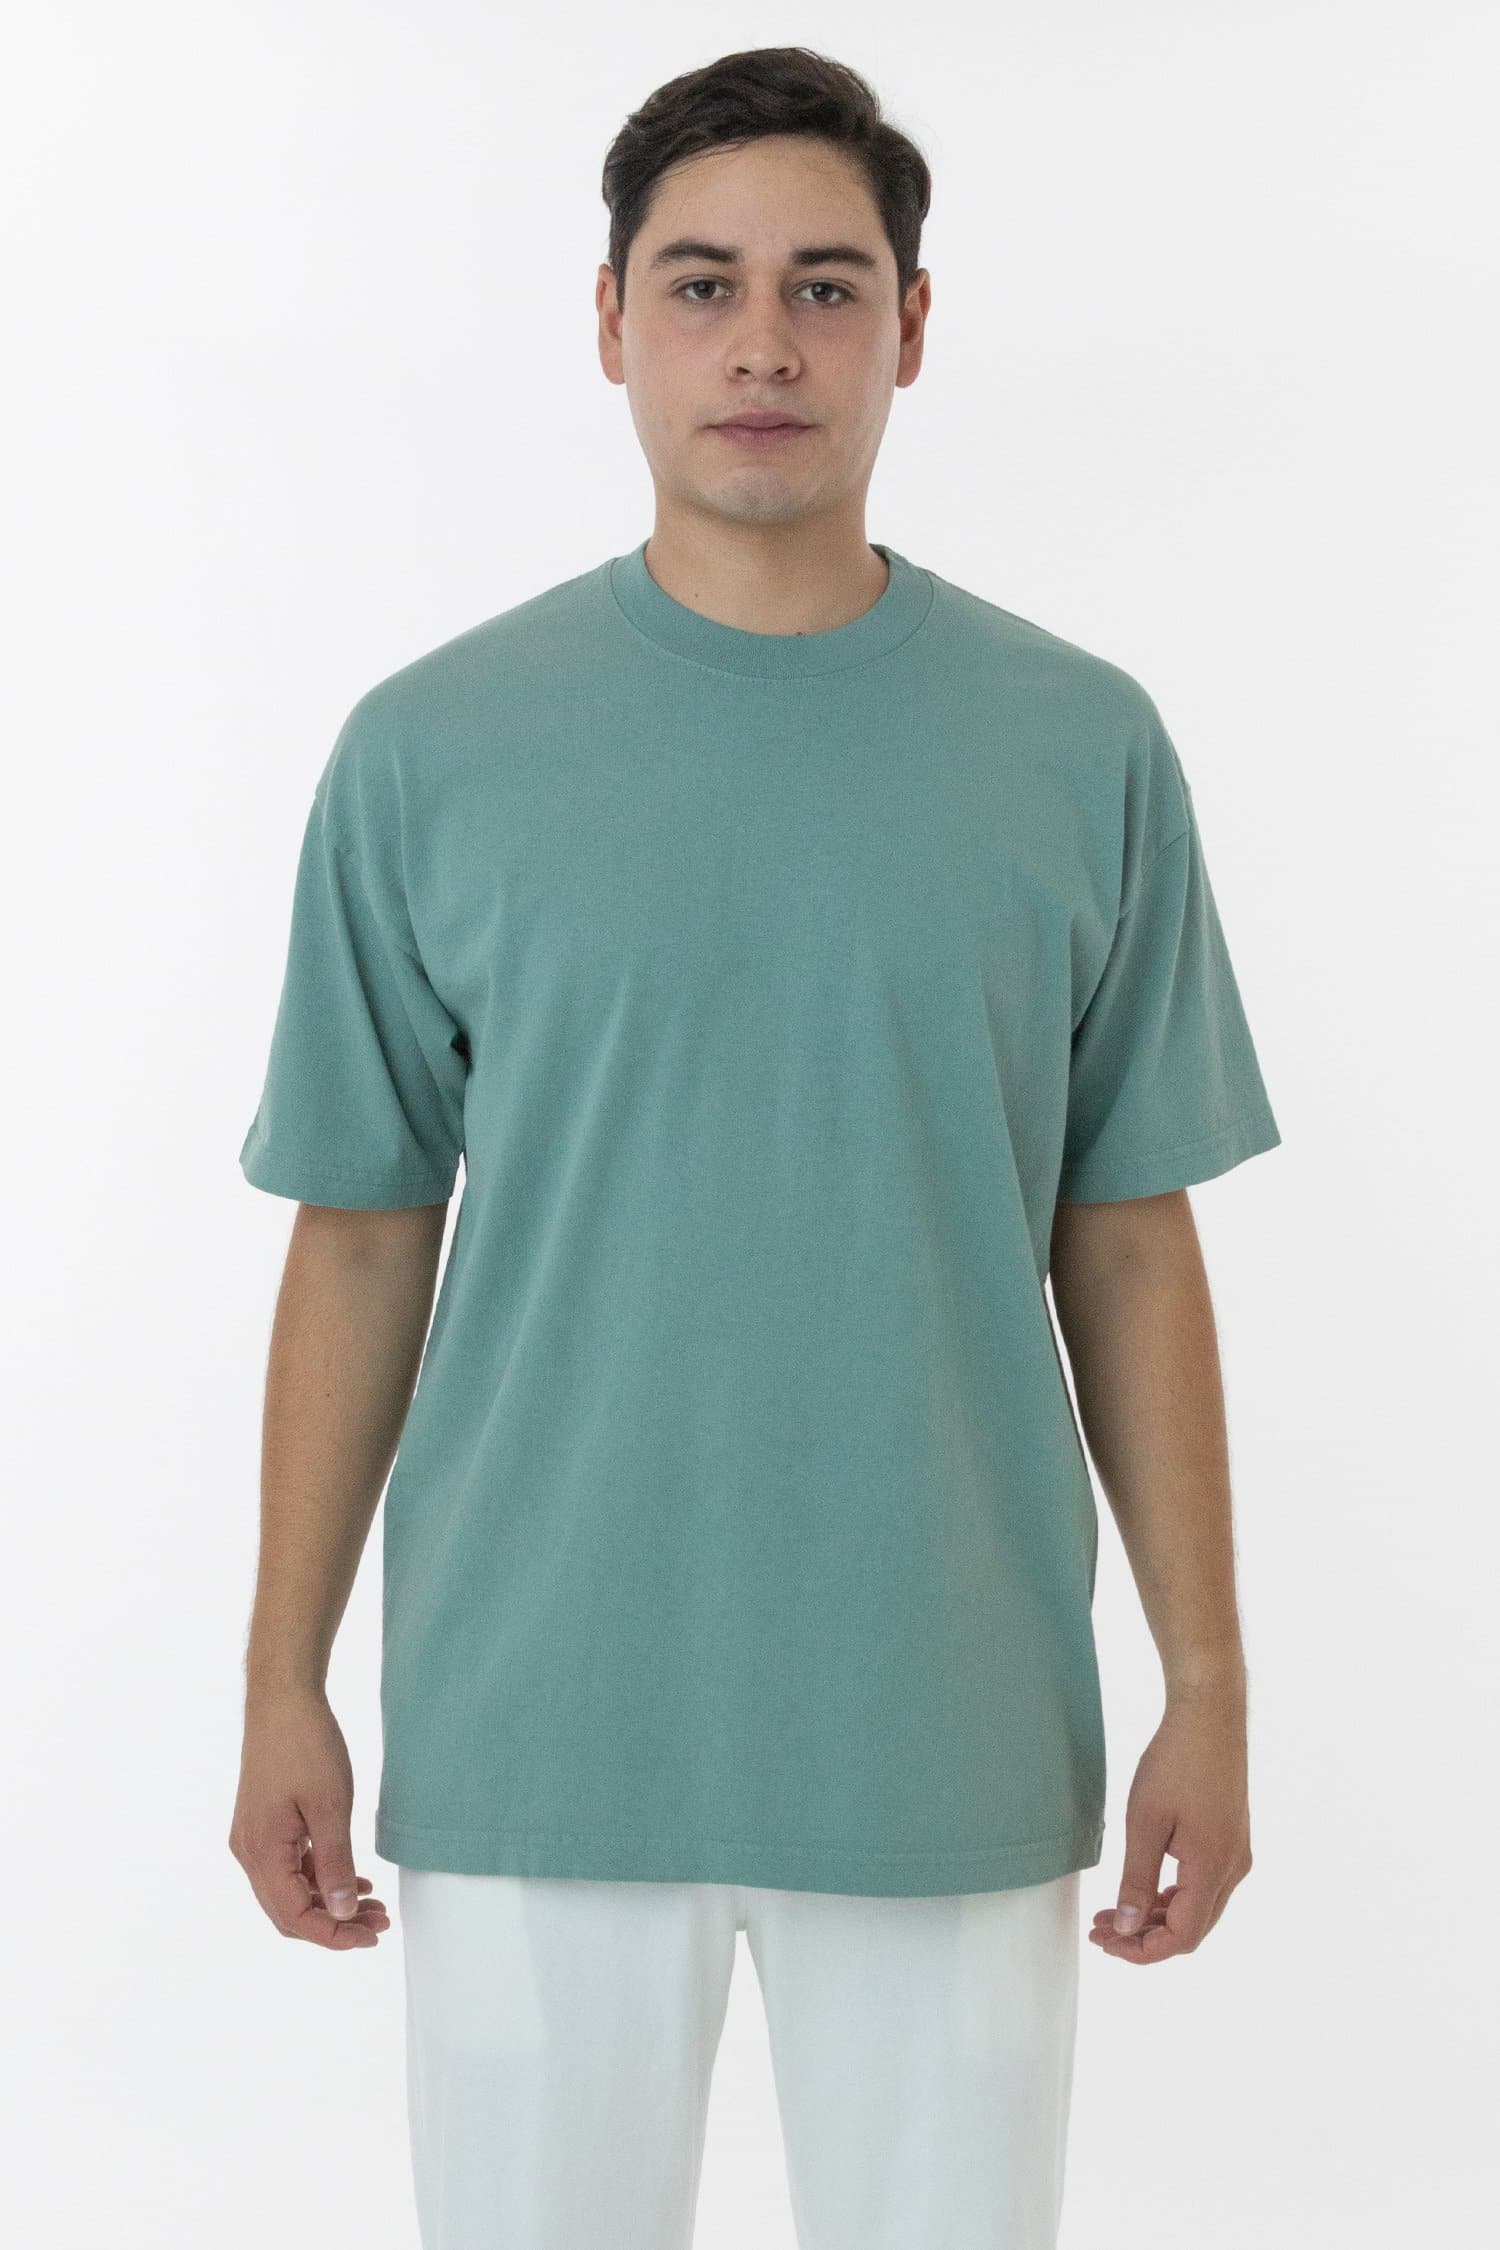 Los Angeles Apparel best blank t shirt for your Clothing Brand